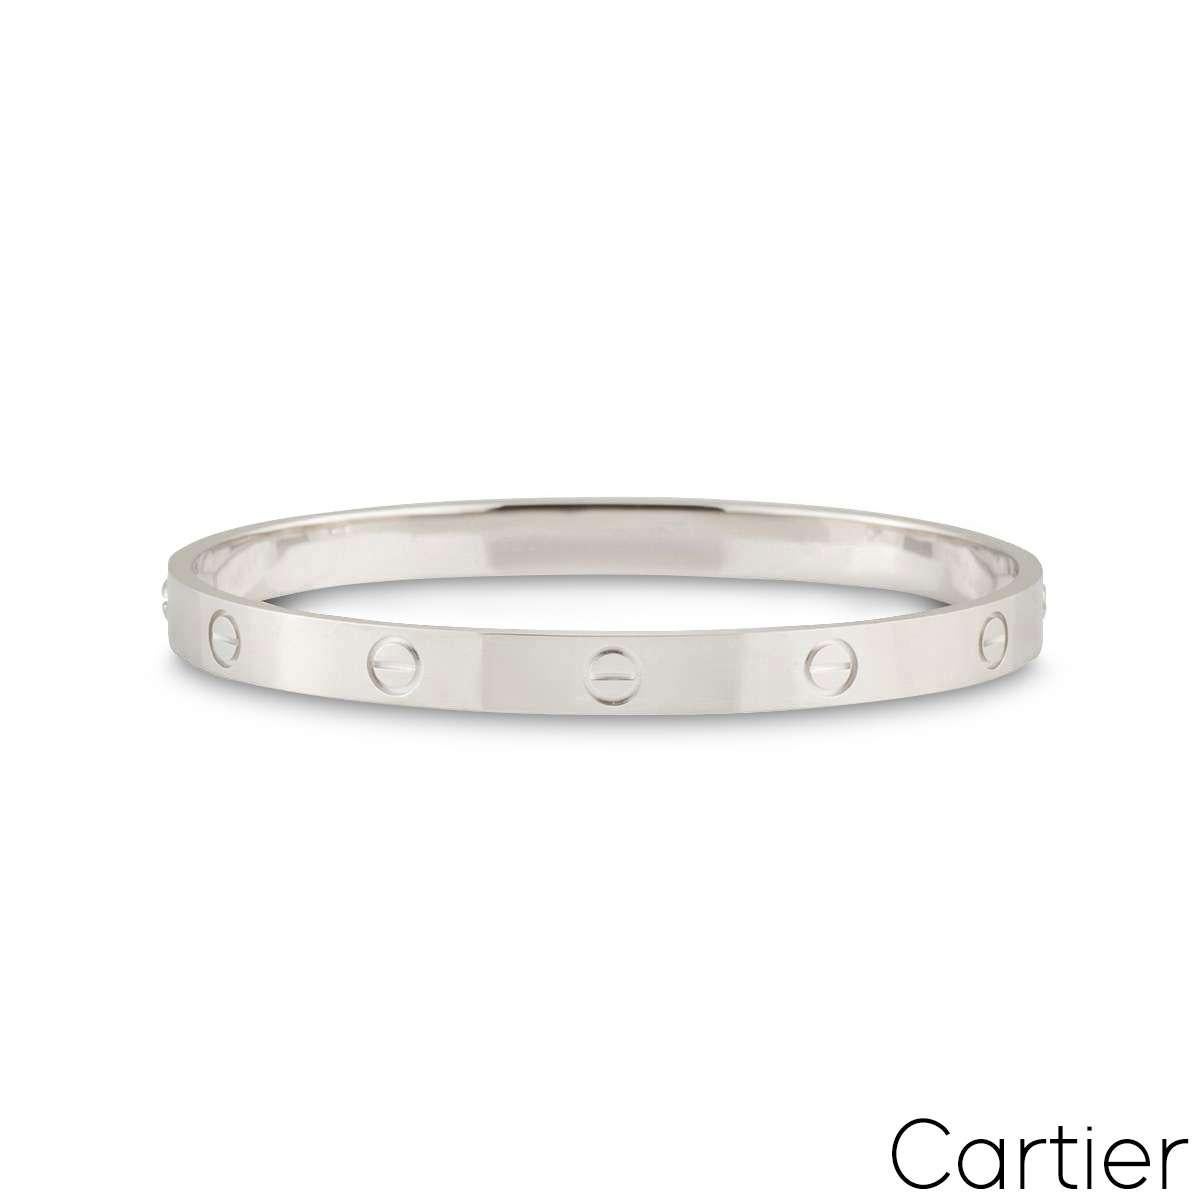 An 18k white gold Cartier bracelet from the Love collection. The bracelet comprises of the iconic screw motifs on the outer edge. The bracelet is a size 18, features the new style screw fitting and has a gross weight of 33.40 grams.

Comes complete